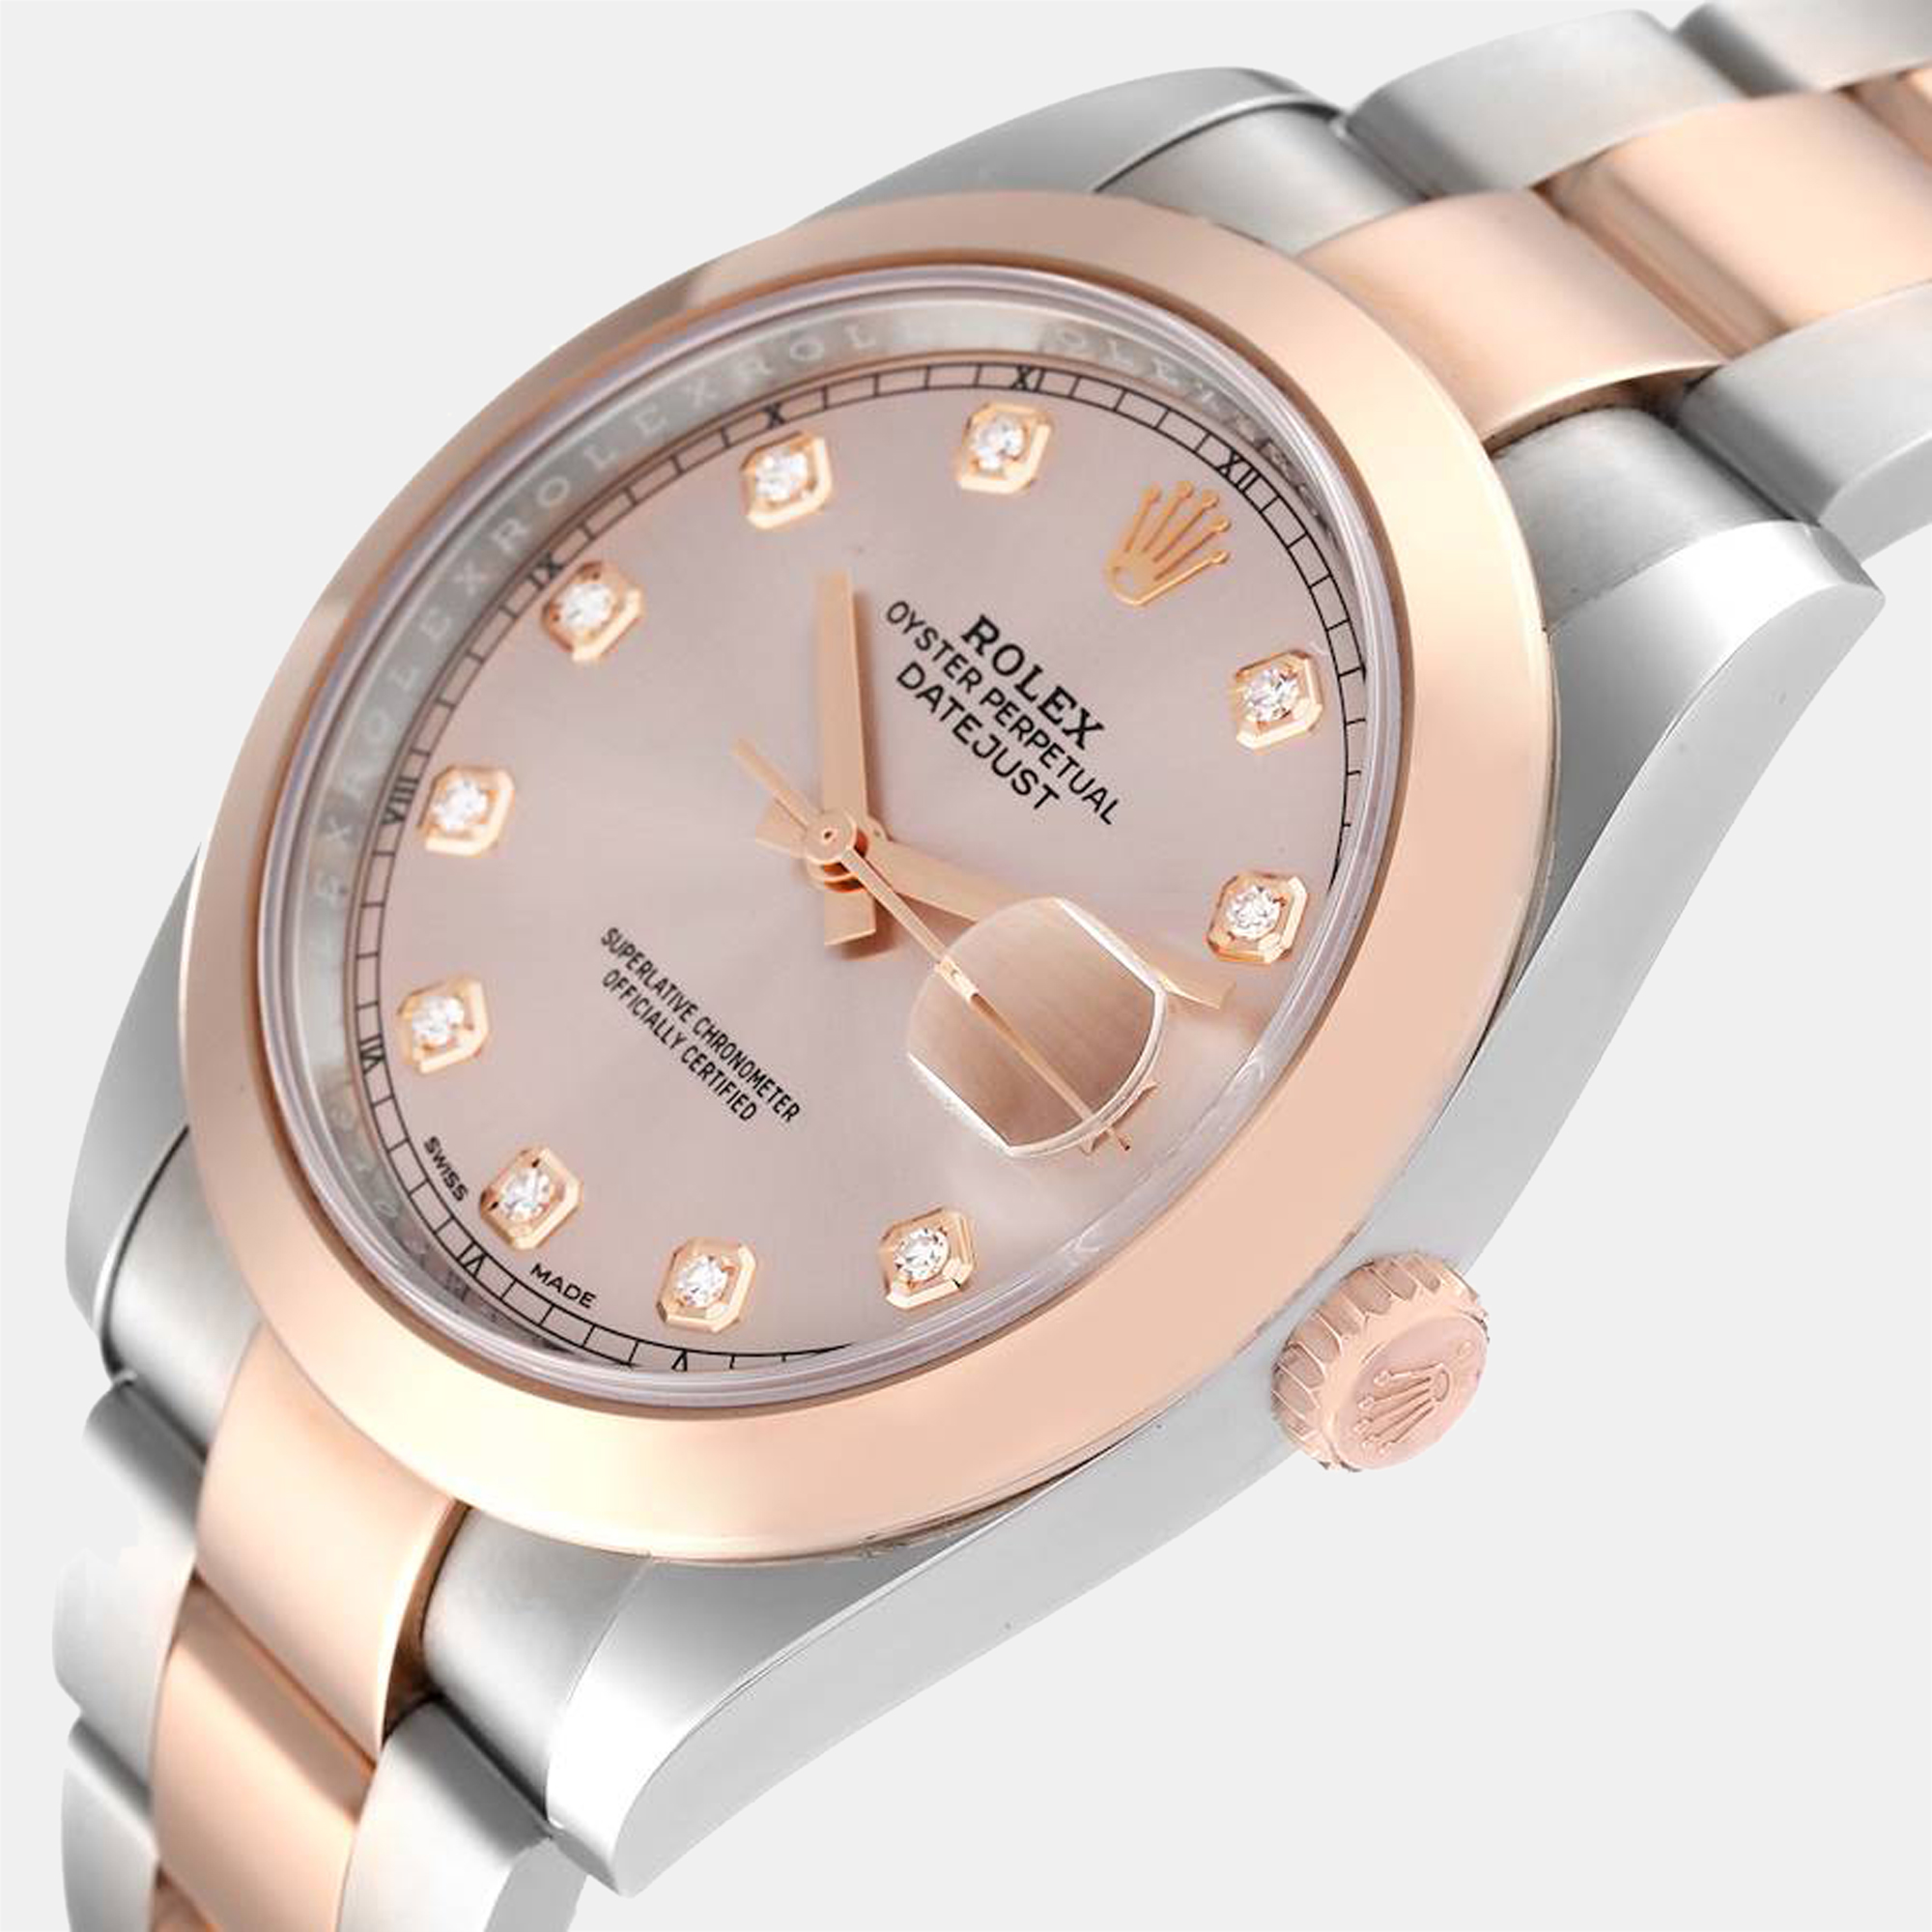 

Rolex Rose Diamonds 18K Rose Gold And Stainless Steel Datejust 126301 Automatic Men's Wristwatch 41 mm, Pink